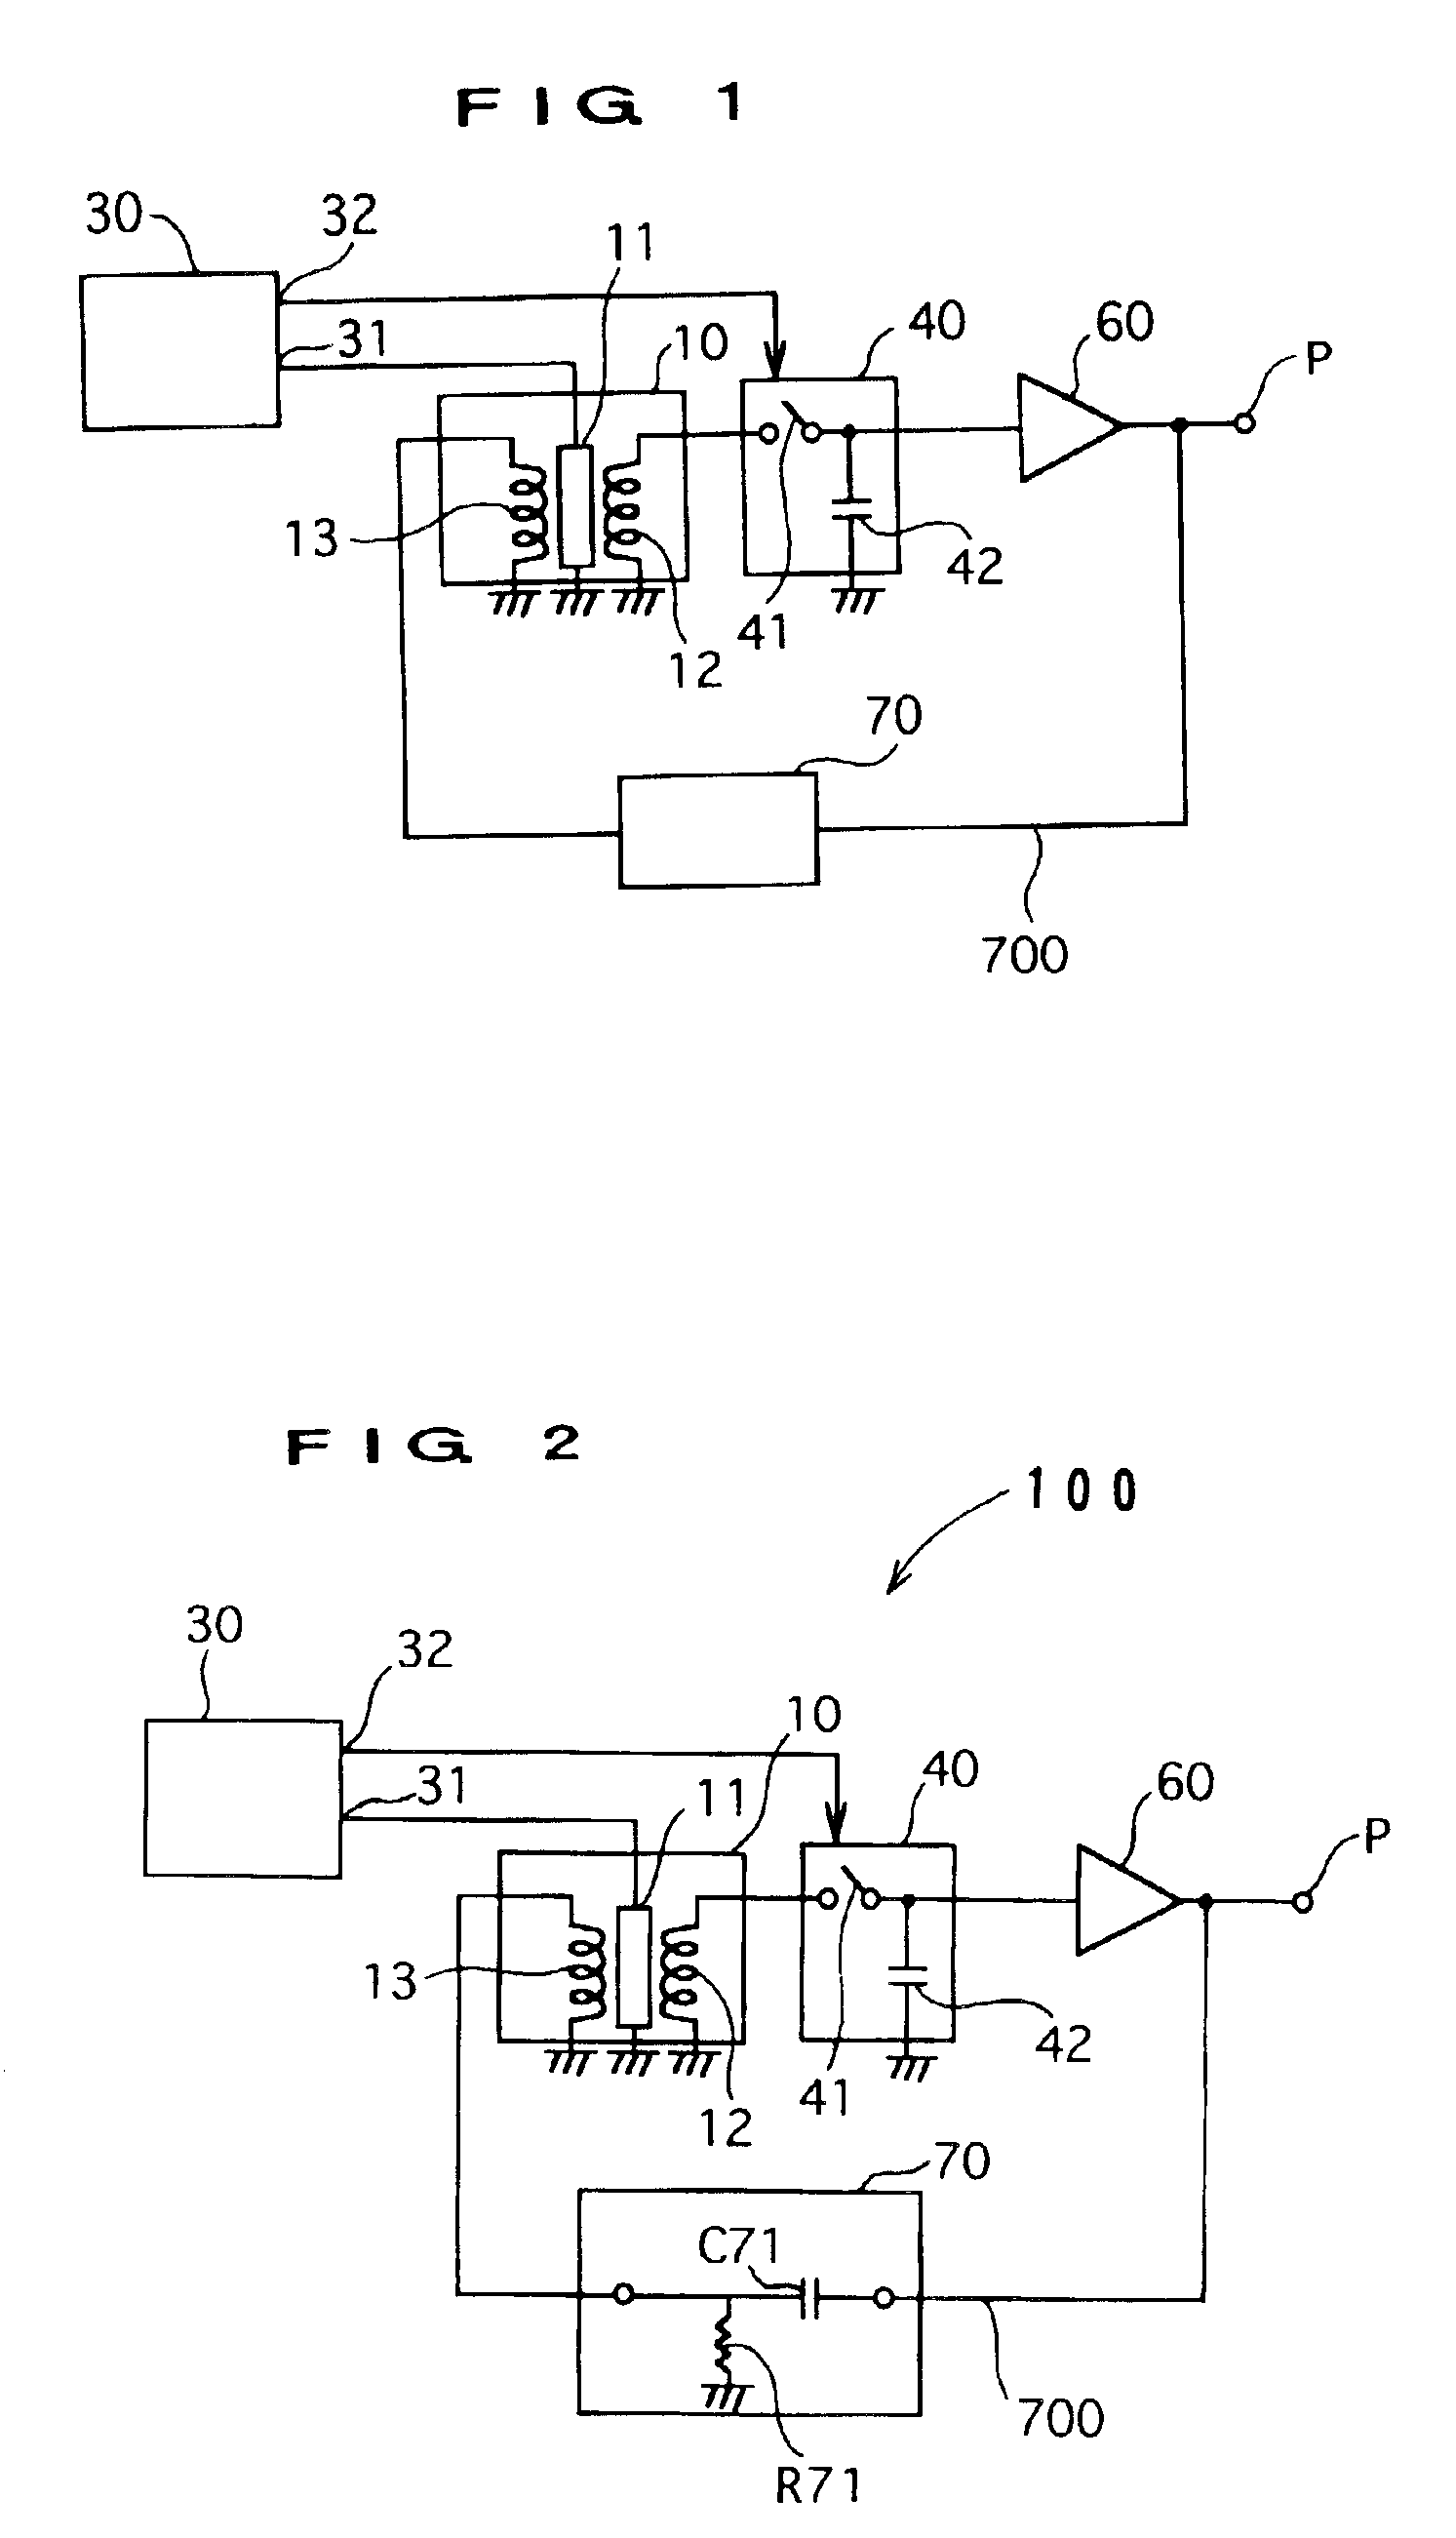 Magnetic field detection device